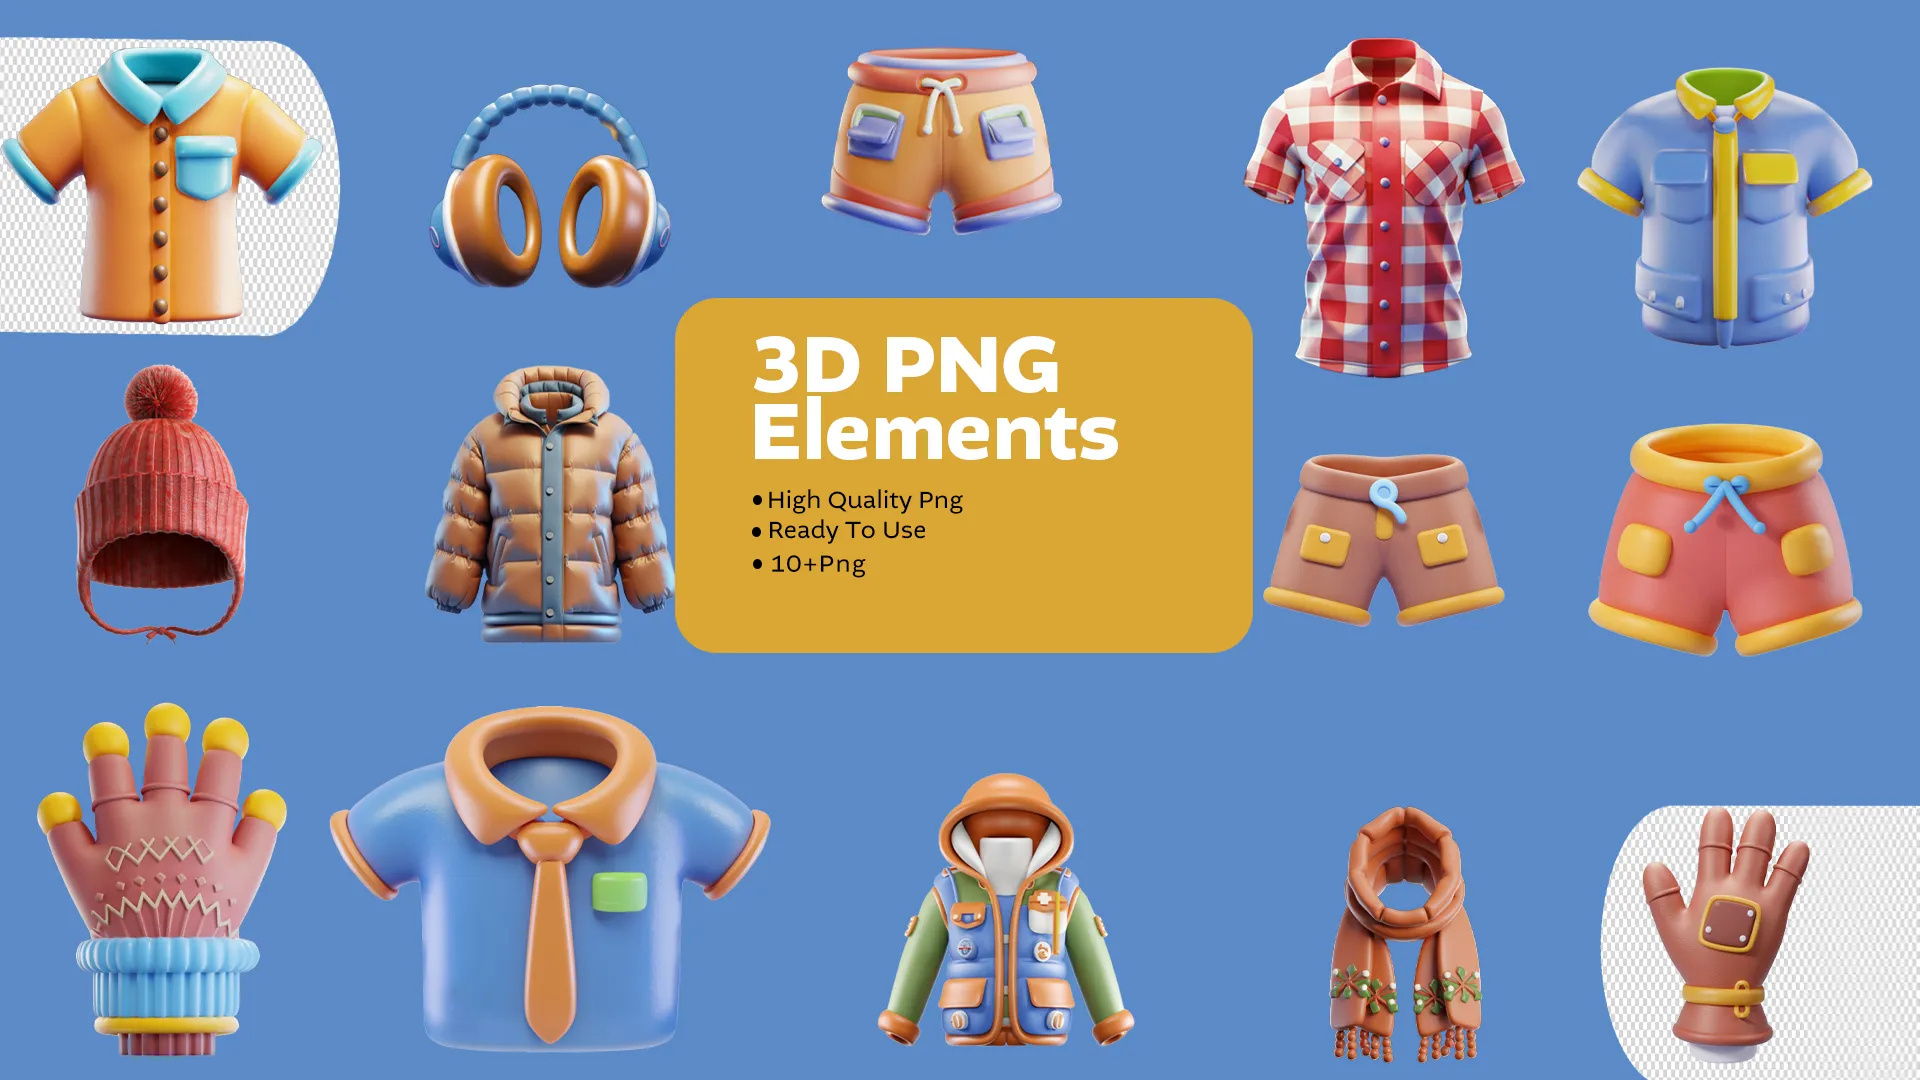 Stylish Winter Apparel 3D Pack for Fashion Design image